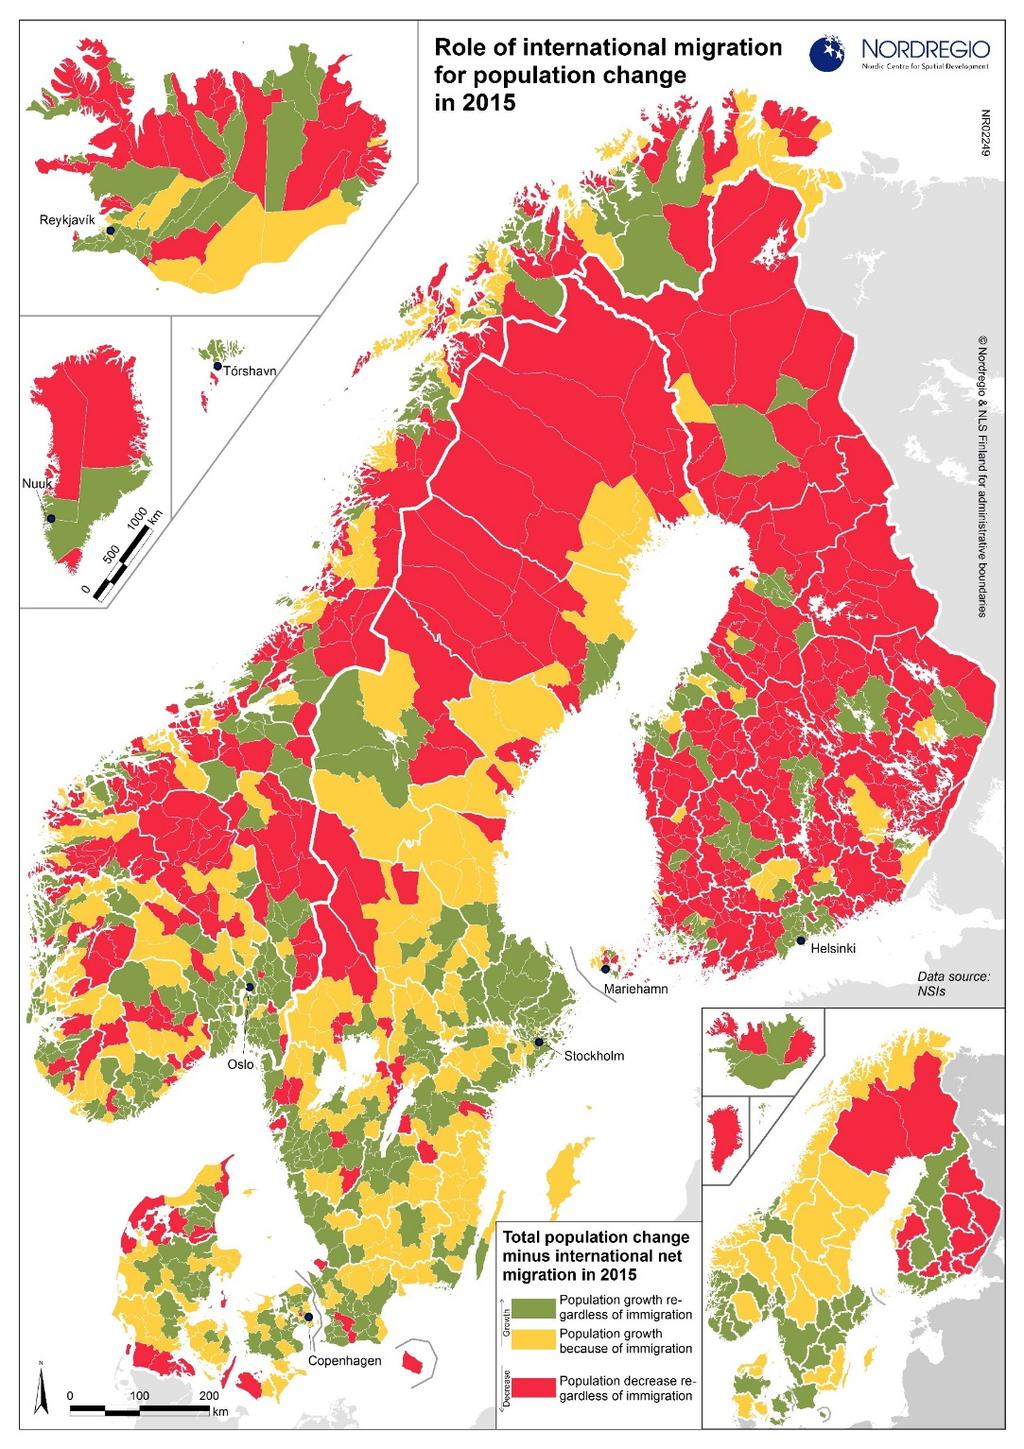 Population growth with and without immigration In 2015, 287 municipalities in the Nordic countries had population growth because of immigration (the yellow areas on the map) The total international